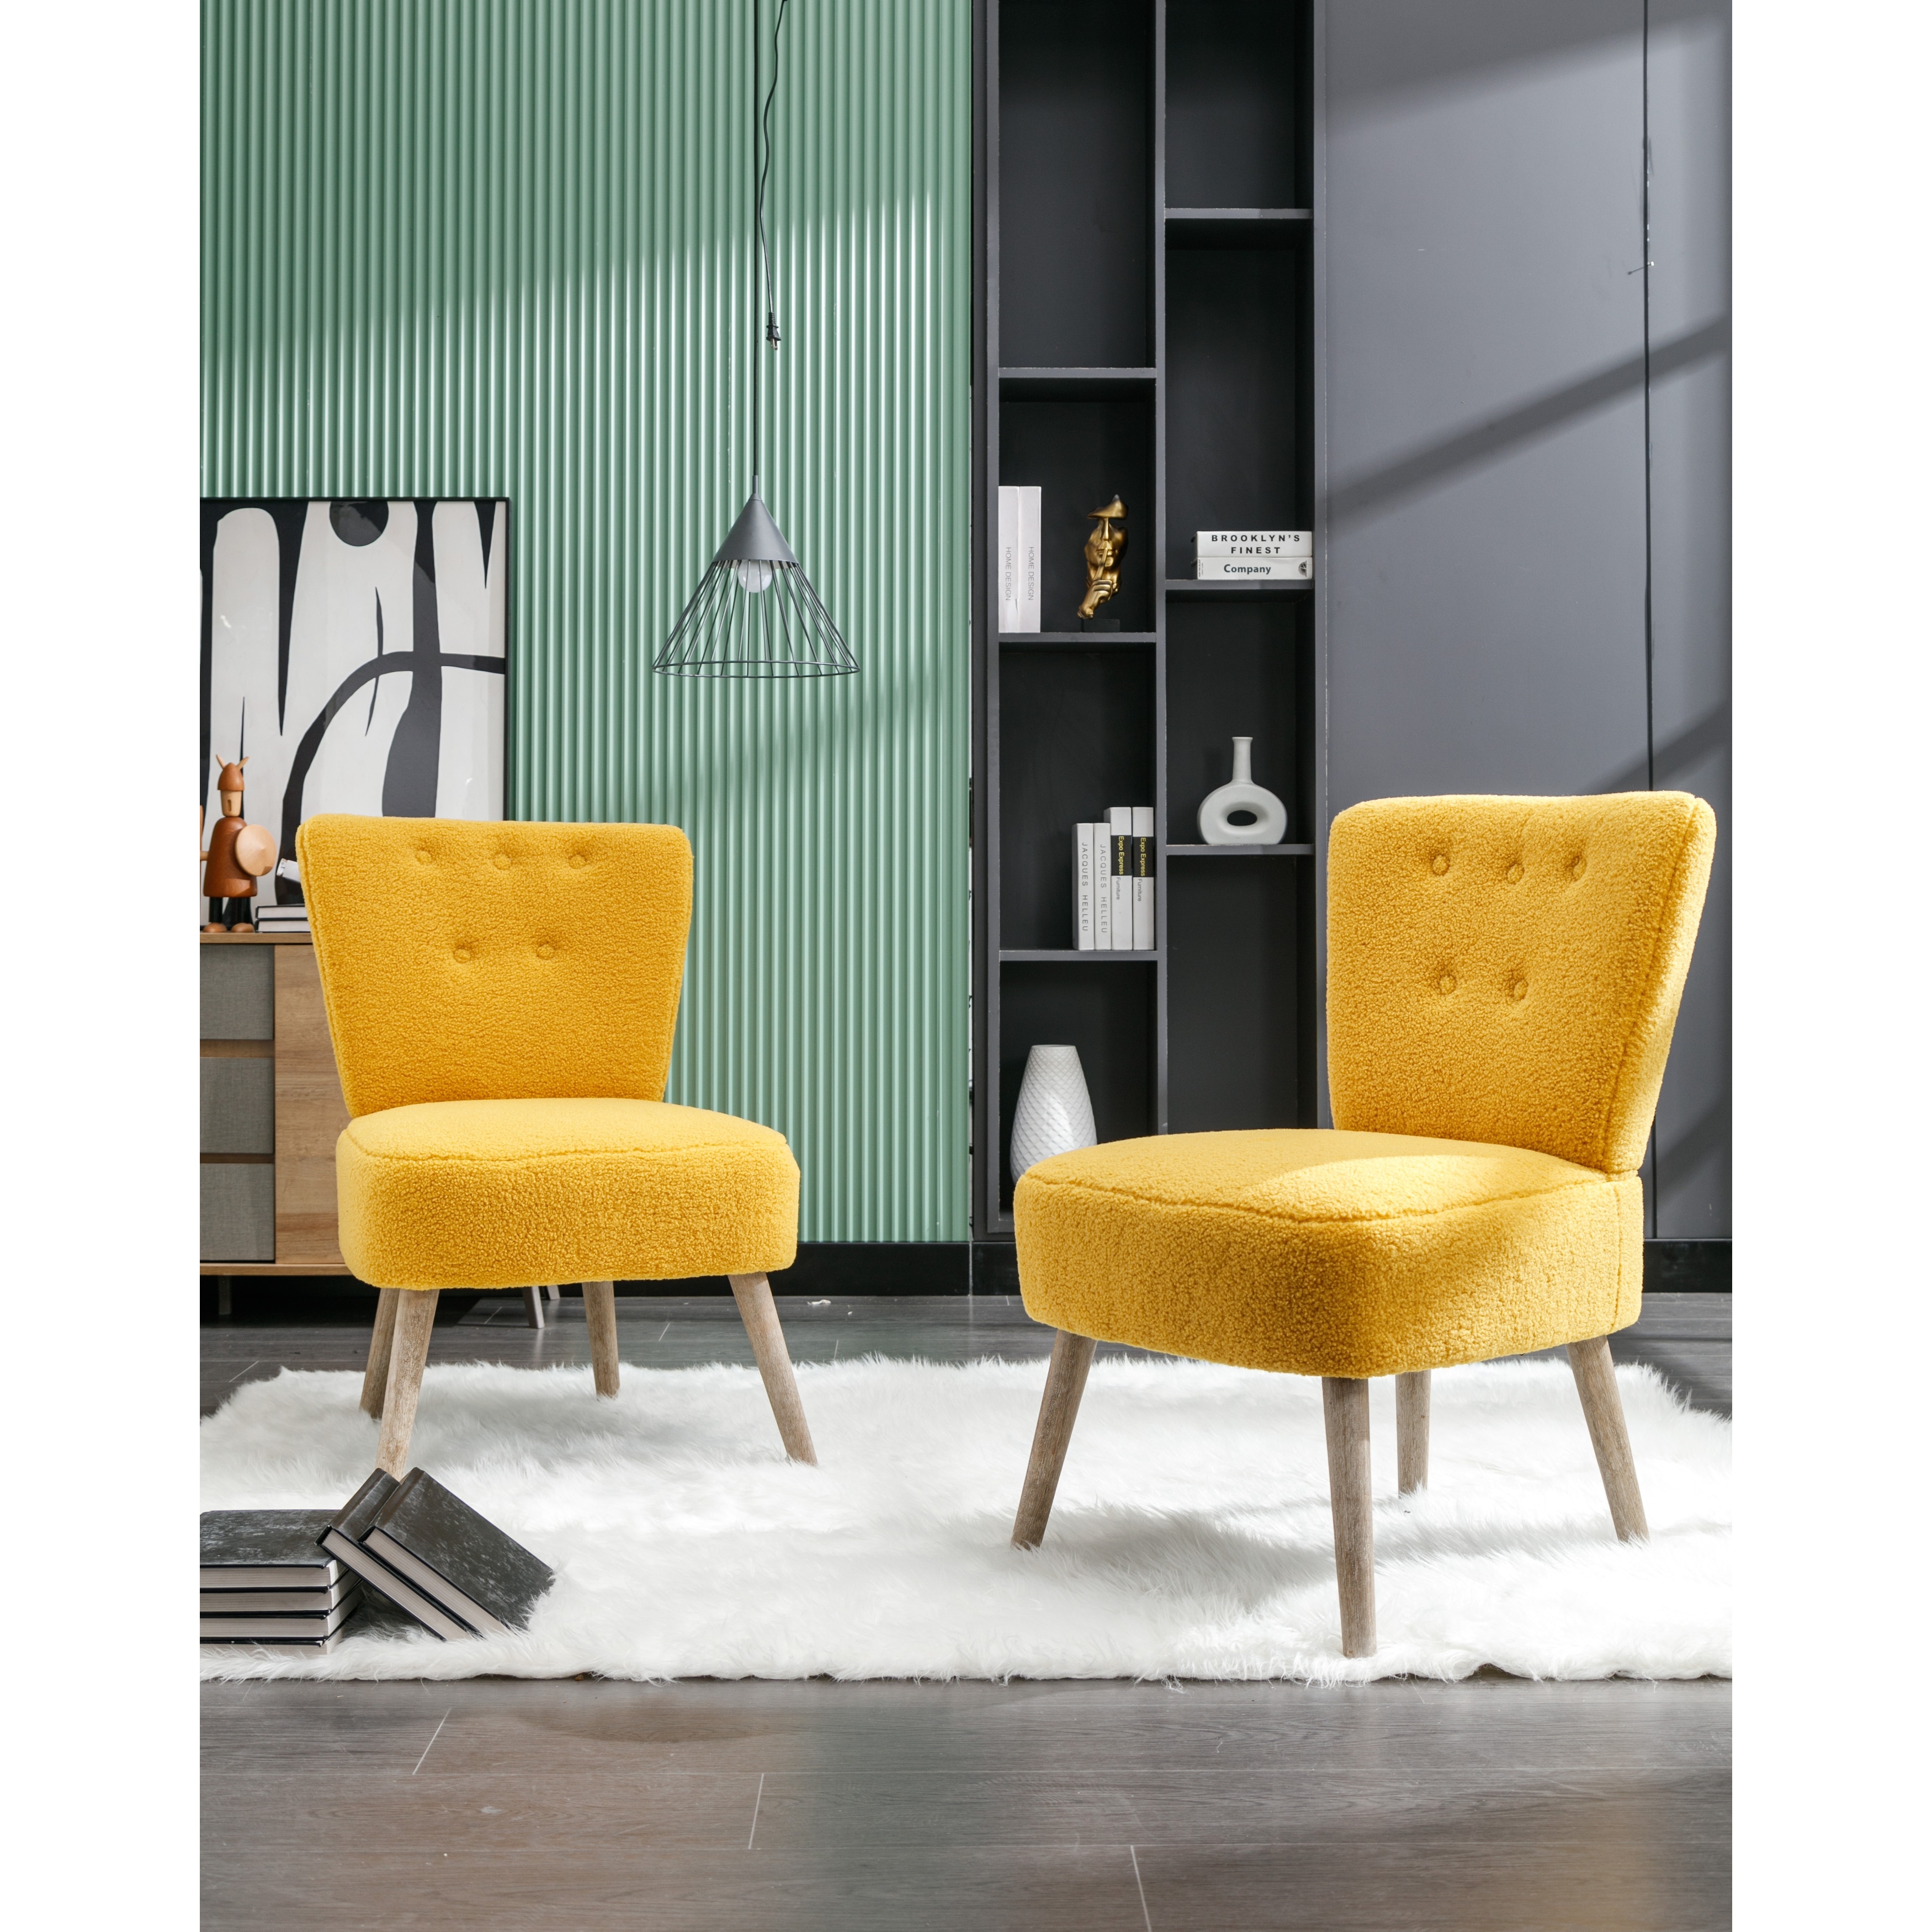 https://ak1.ostkcdn.com/images/products/is/images/direct/85f50f7a773d9616d2cd33e3a411e423a143fe13/Modern-Teddy-Fabric-Armless-Accent-Chair-Upholstered-Button-Single-Sofa-Lounge-Chair%2C-Lamb-Fleece-Slipper-Chair-for-Livingroom.jpg